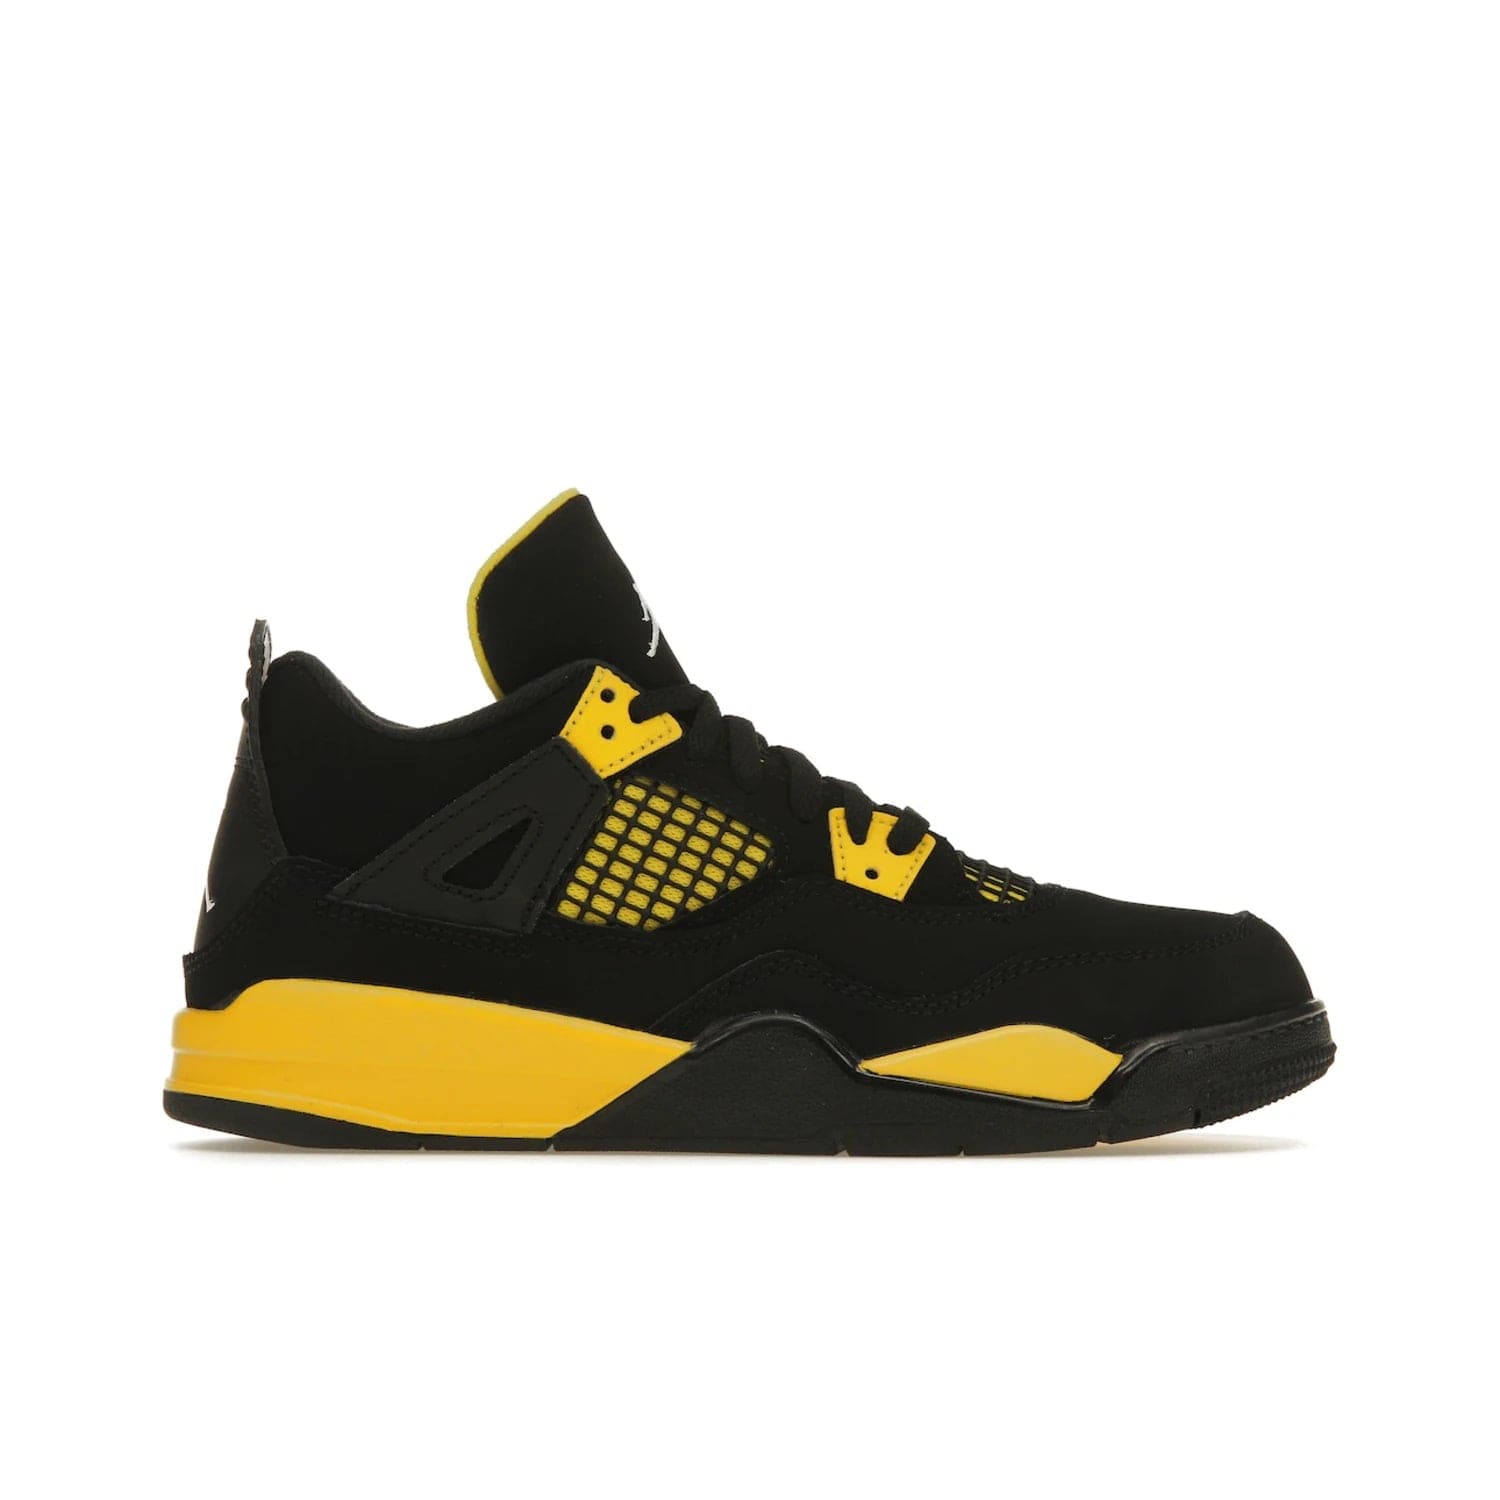 Jordan 4 Retro Thunder (2023) (PS) - Image 1 - Only at www.BallersClubKickz.com - Classic Jordan 4 Retro Thunder sneaker in Black and Tour Yellow colorway. Limited edition release expected to hit the shelves in 2023 on May 13th. Grab your pair!